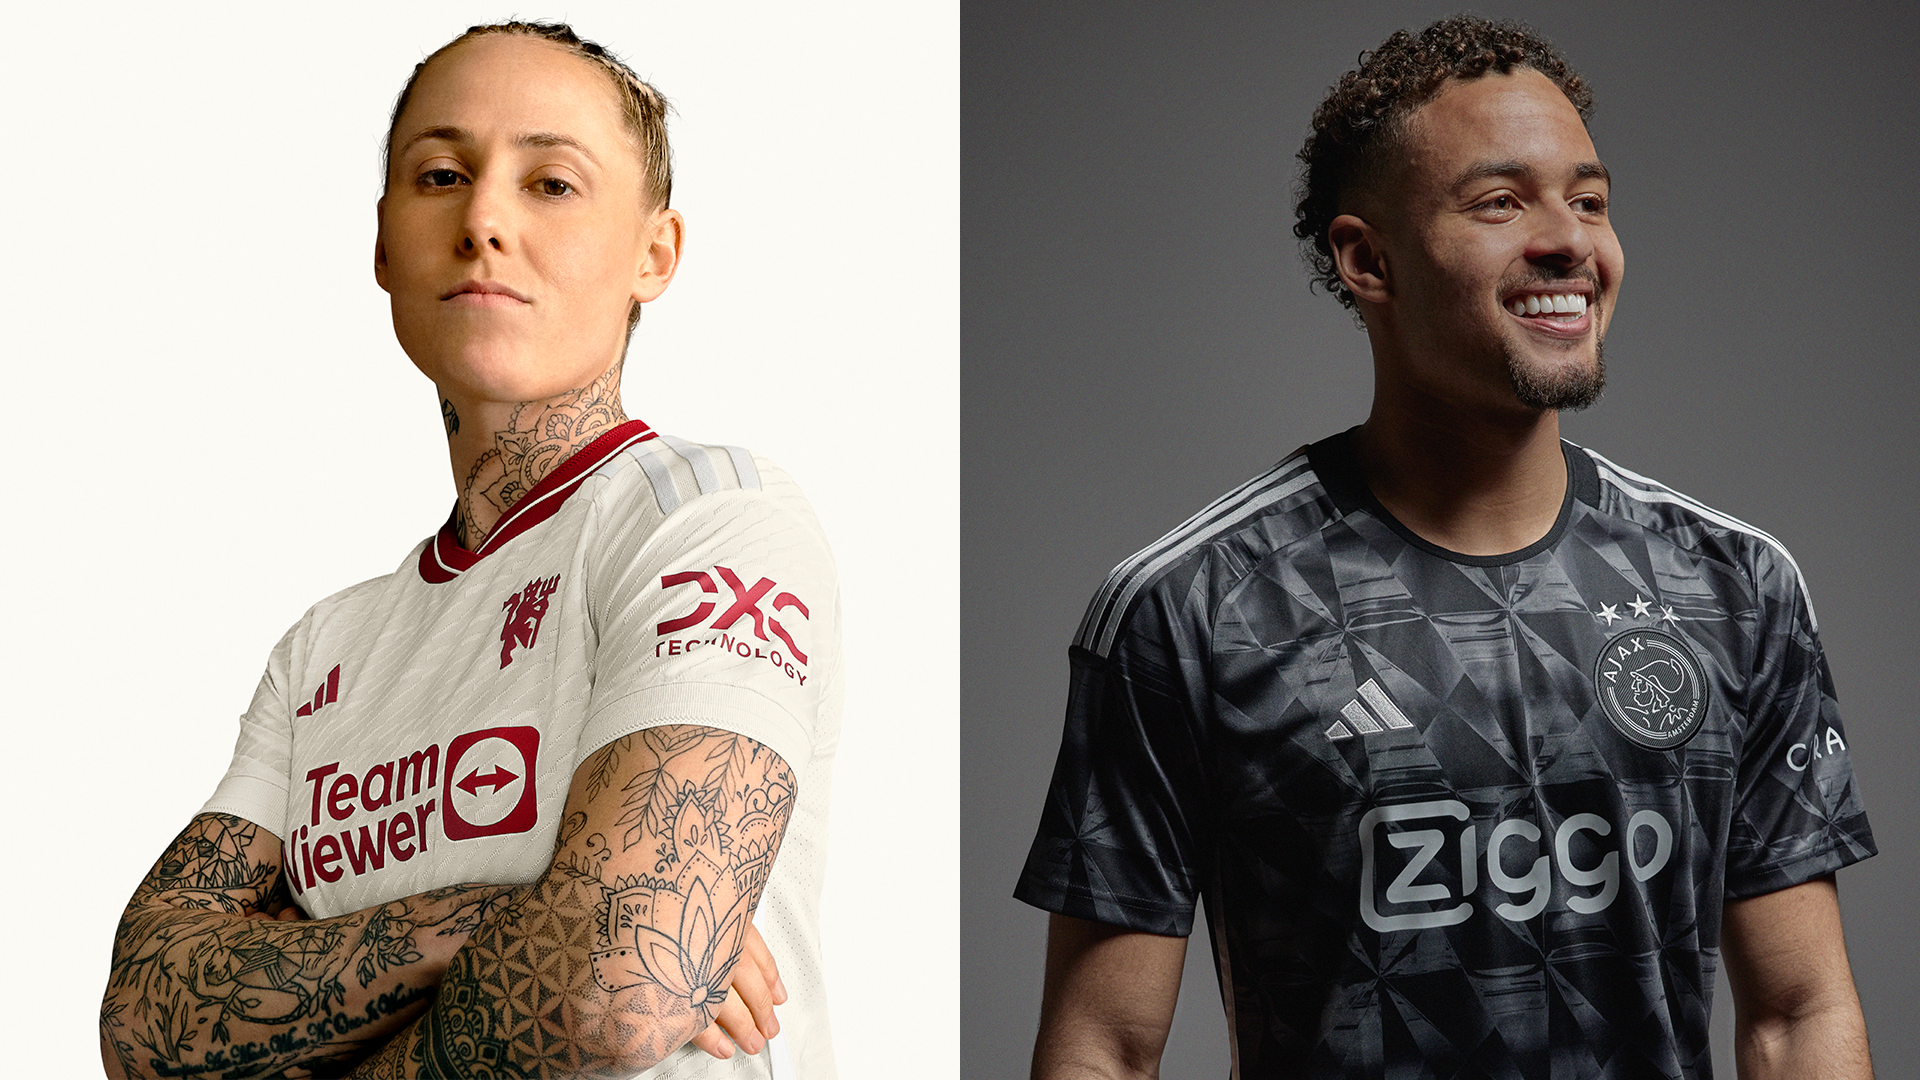 The 2023/2024 Ajax third jersey, inspired by the 'diamonds' of the